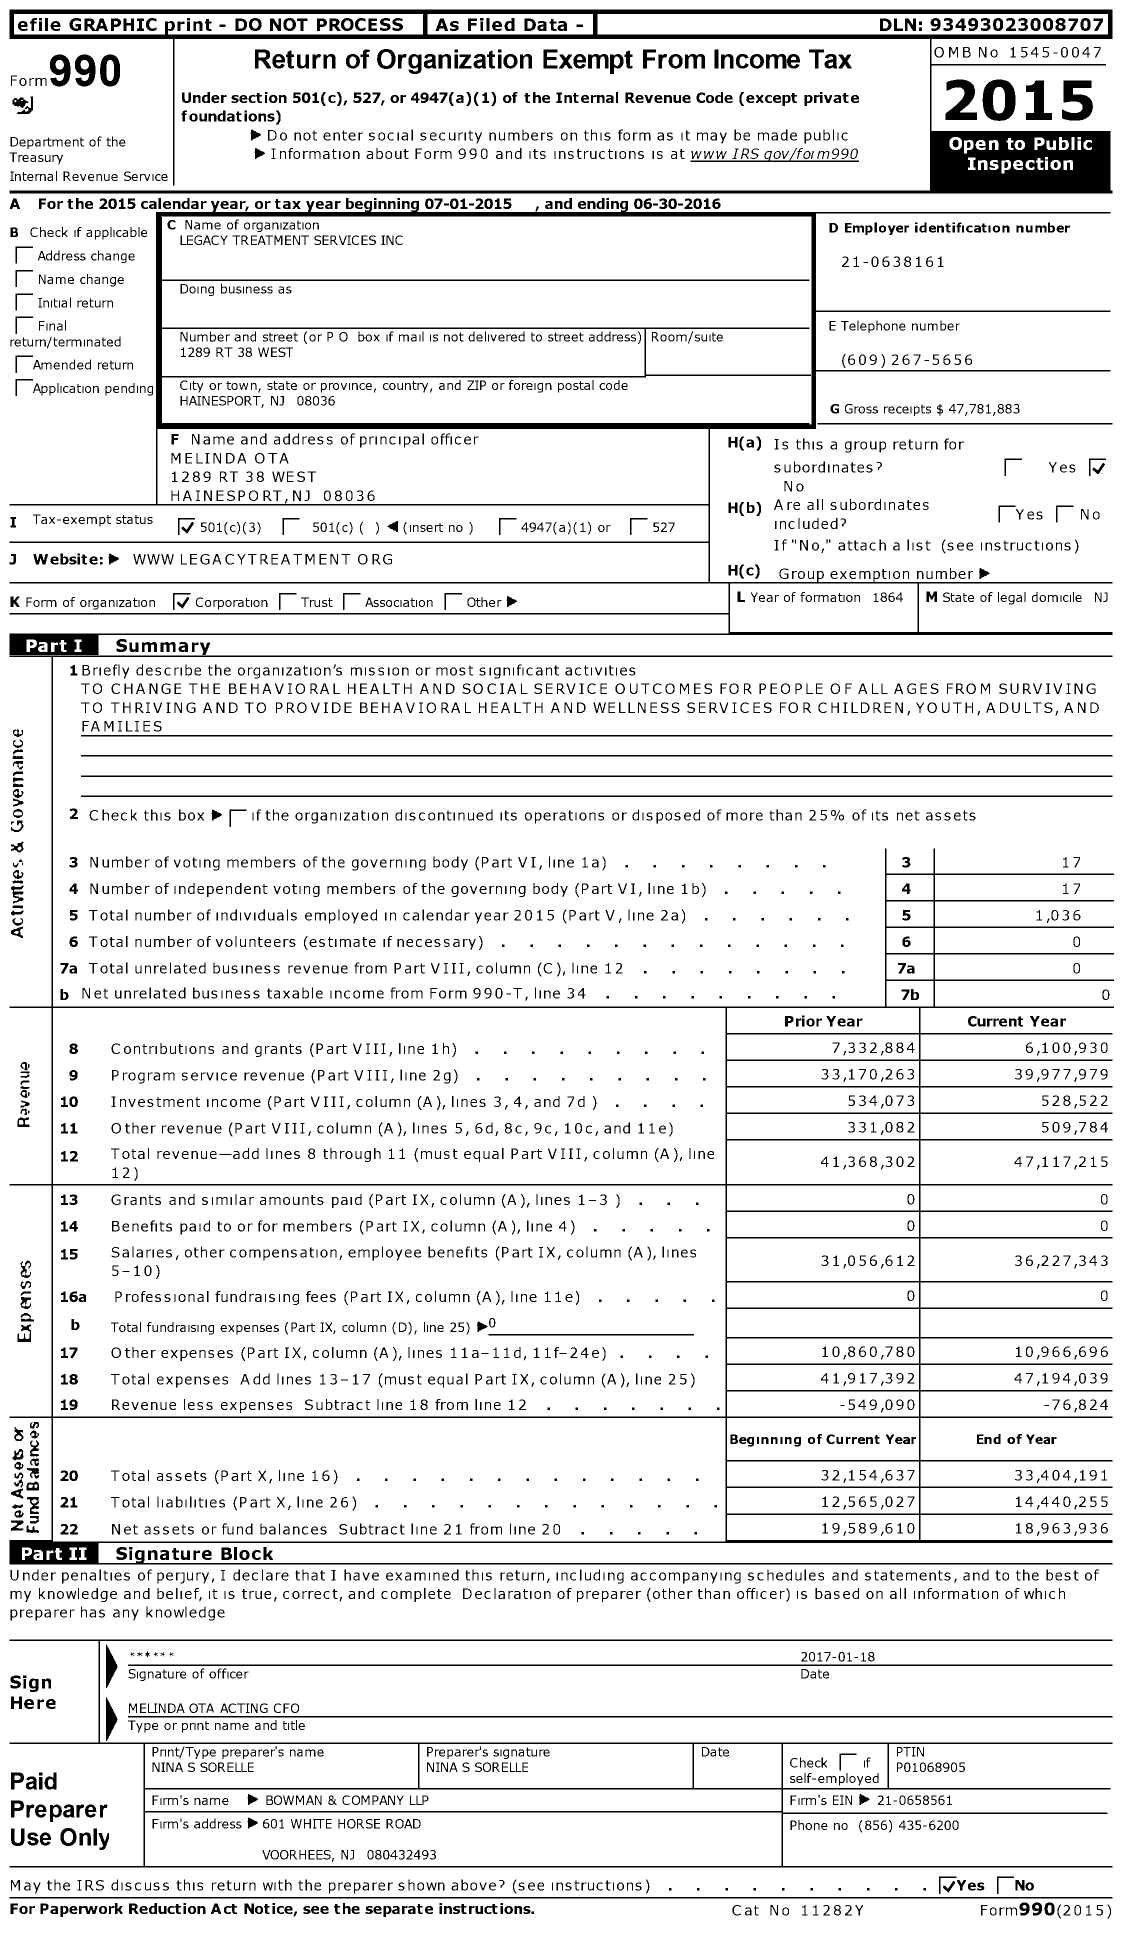 Image of first page of 2015 Form 990 for Legacy Treatment Services